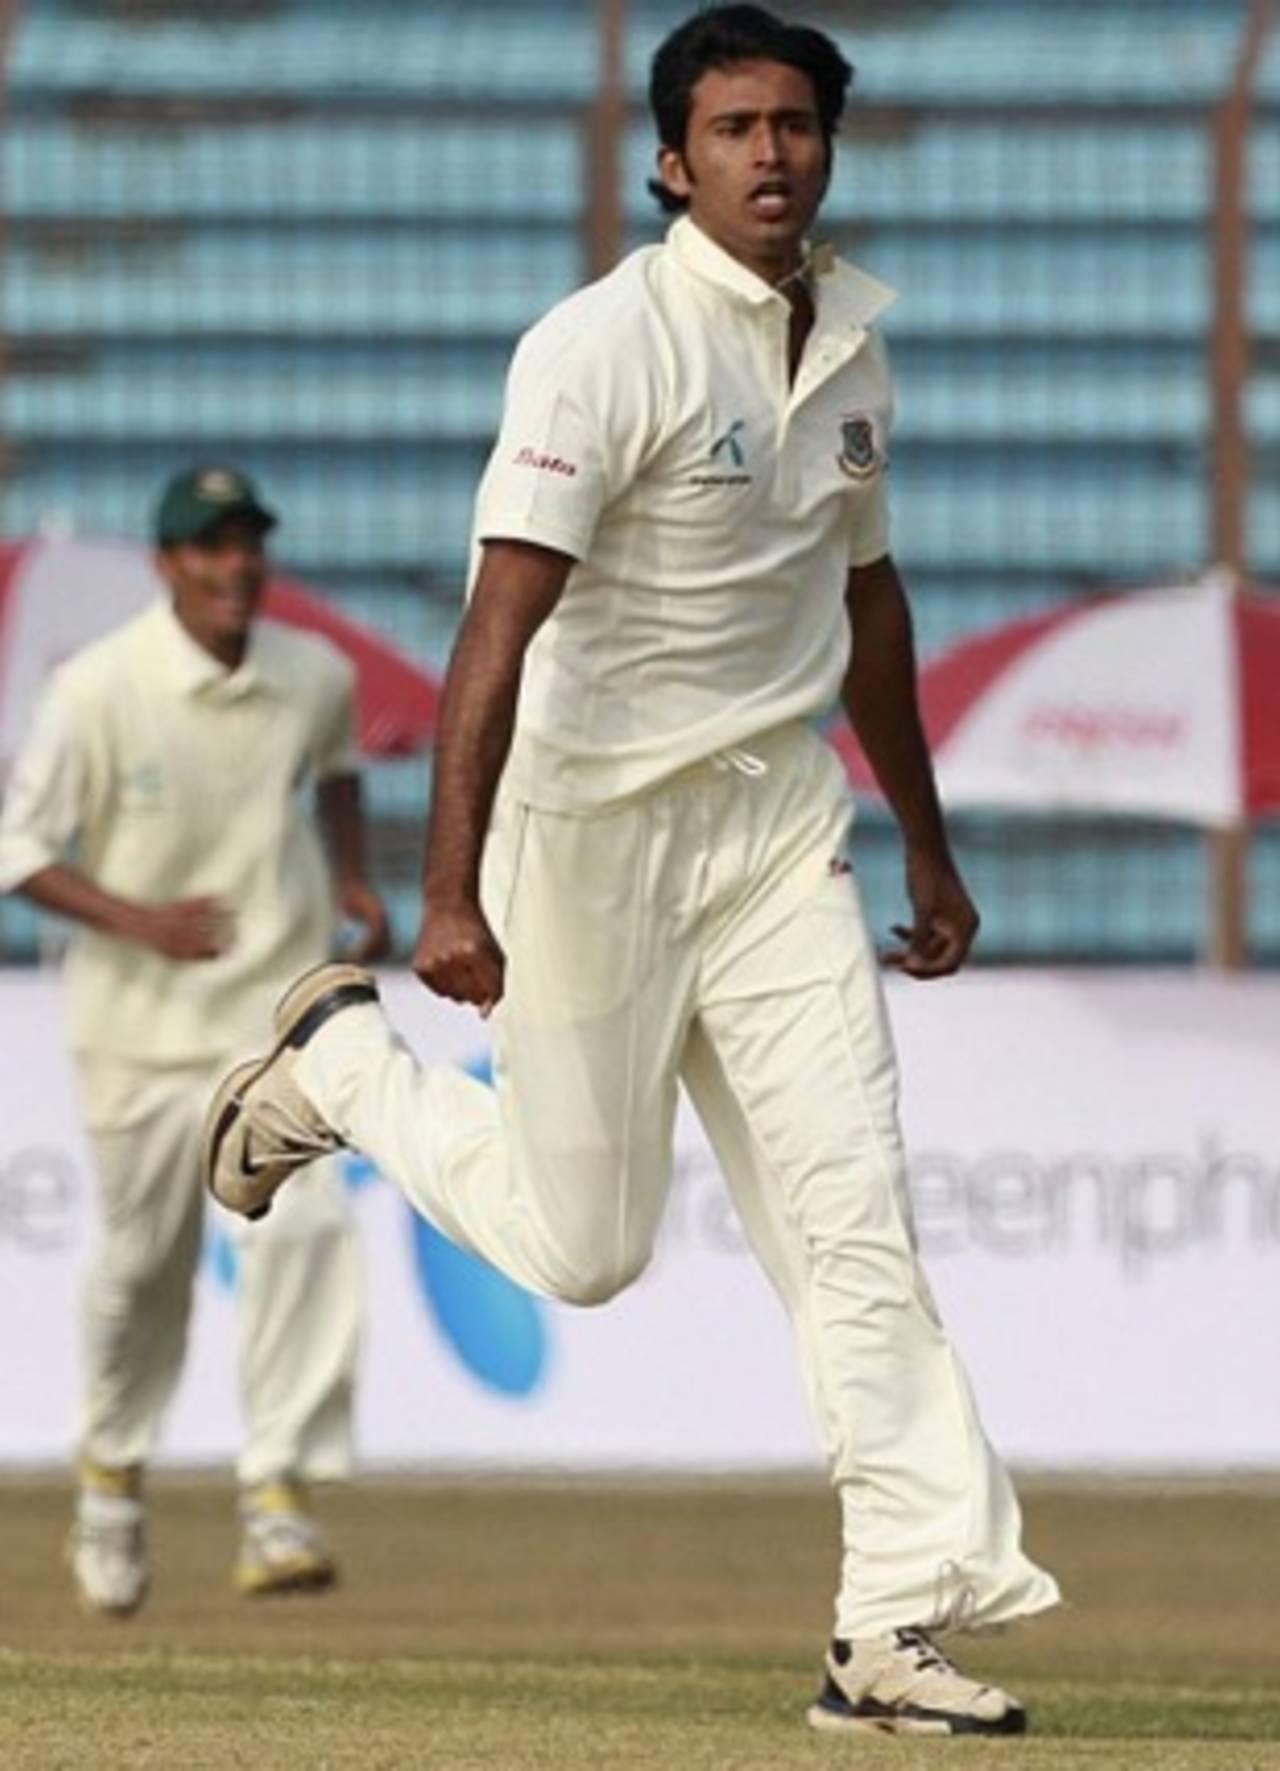 Shahadat Hossain played a prominent role in India's struggle on the first day, Bangladesh v India, 1st Test, Chittagong, 1st day, January 17, 2010